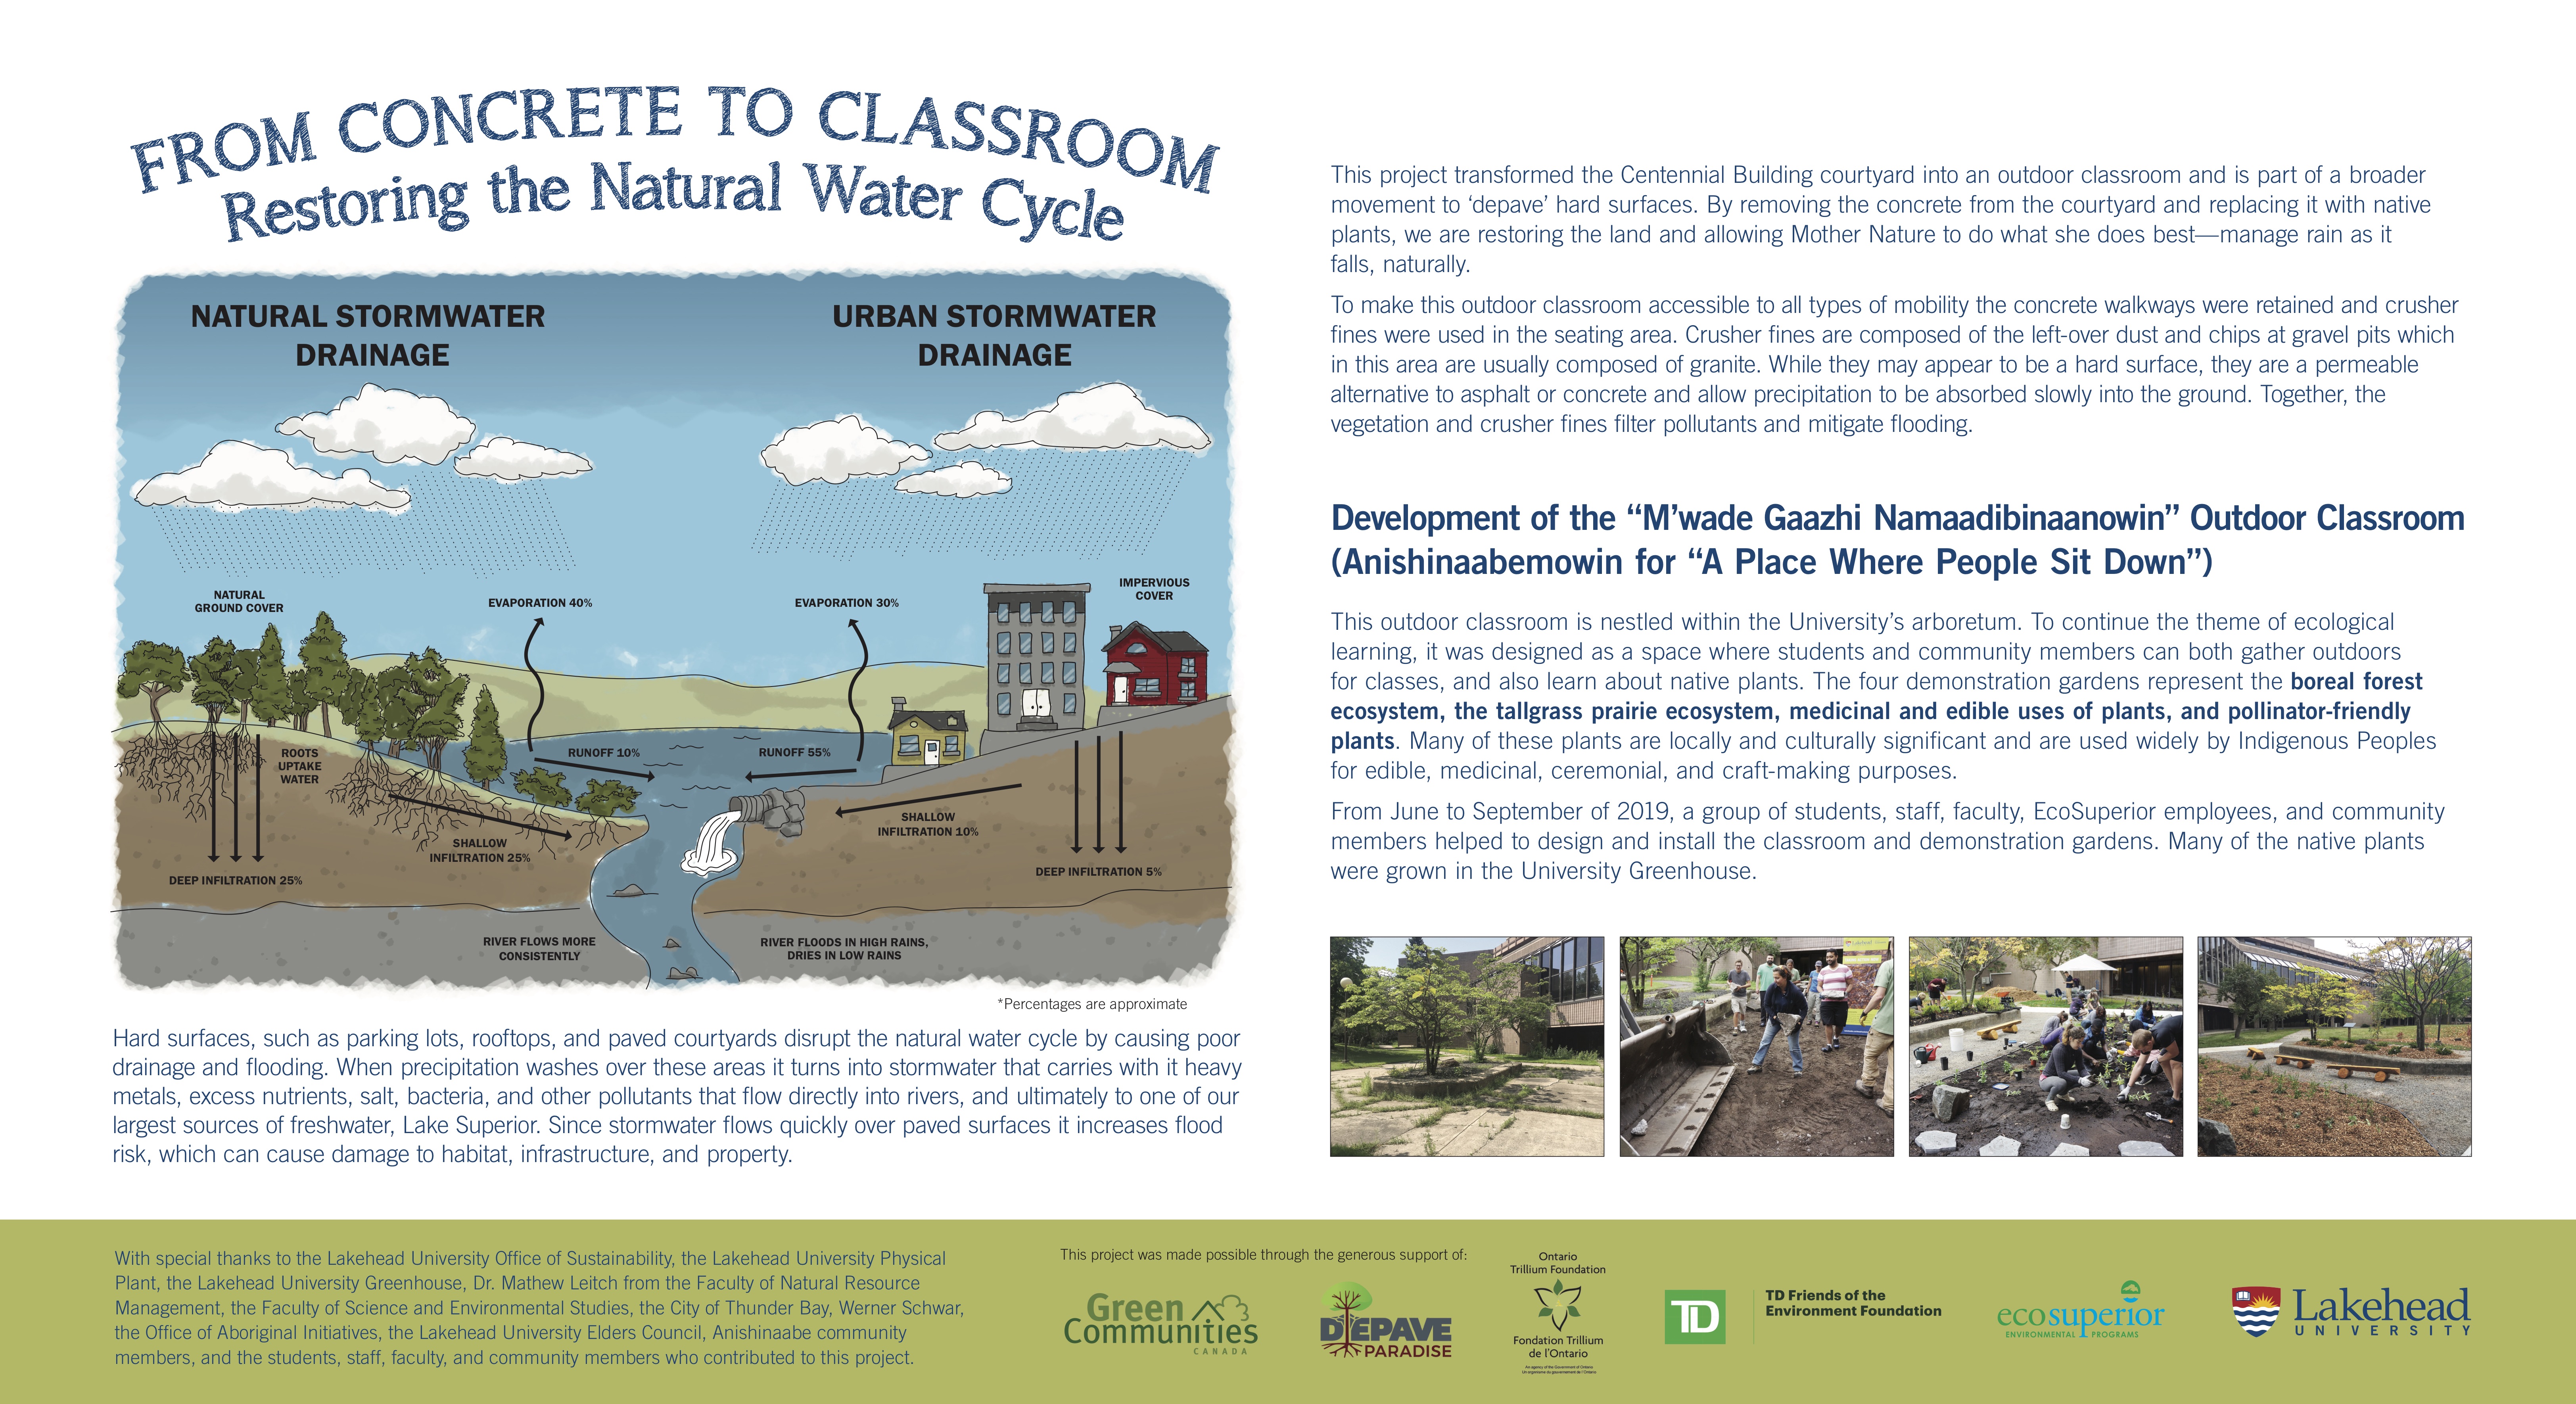 The from concrete to classroom infographic which displays stormwater drainage strategies